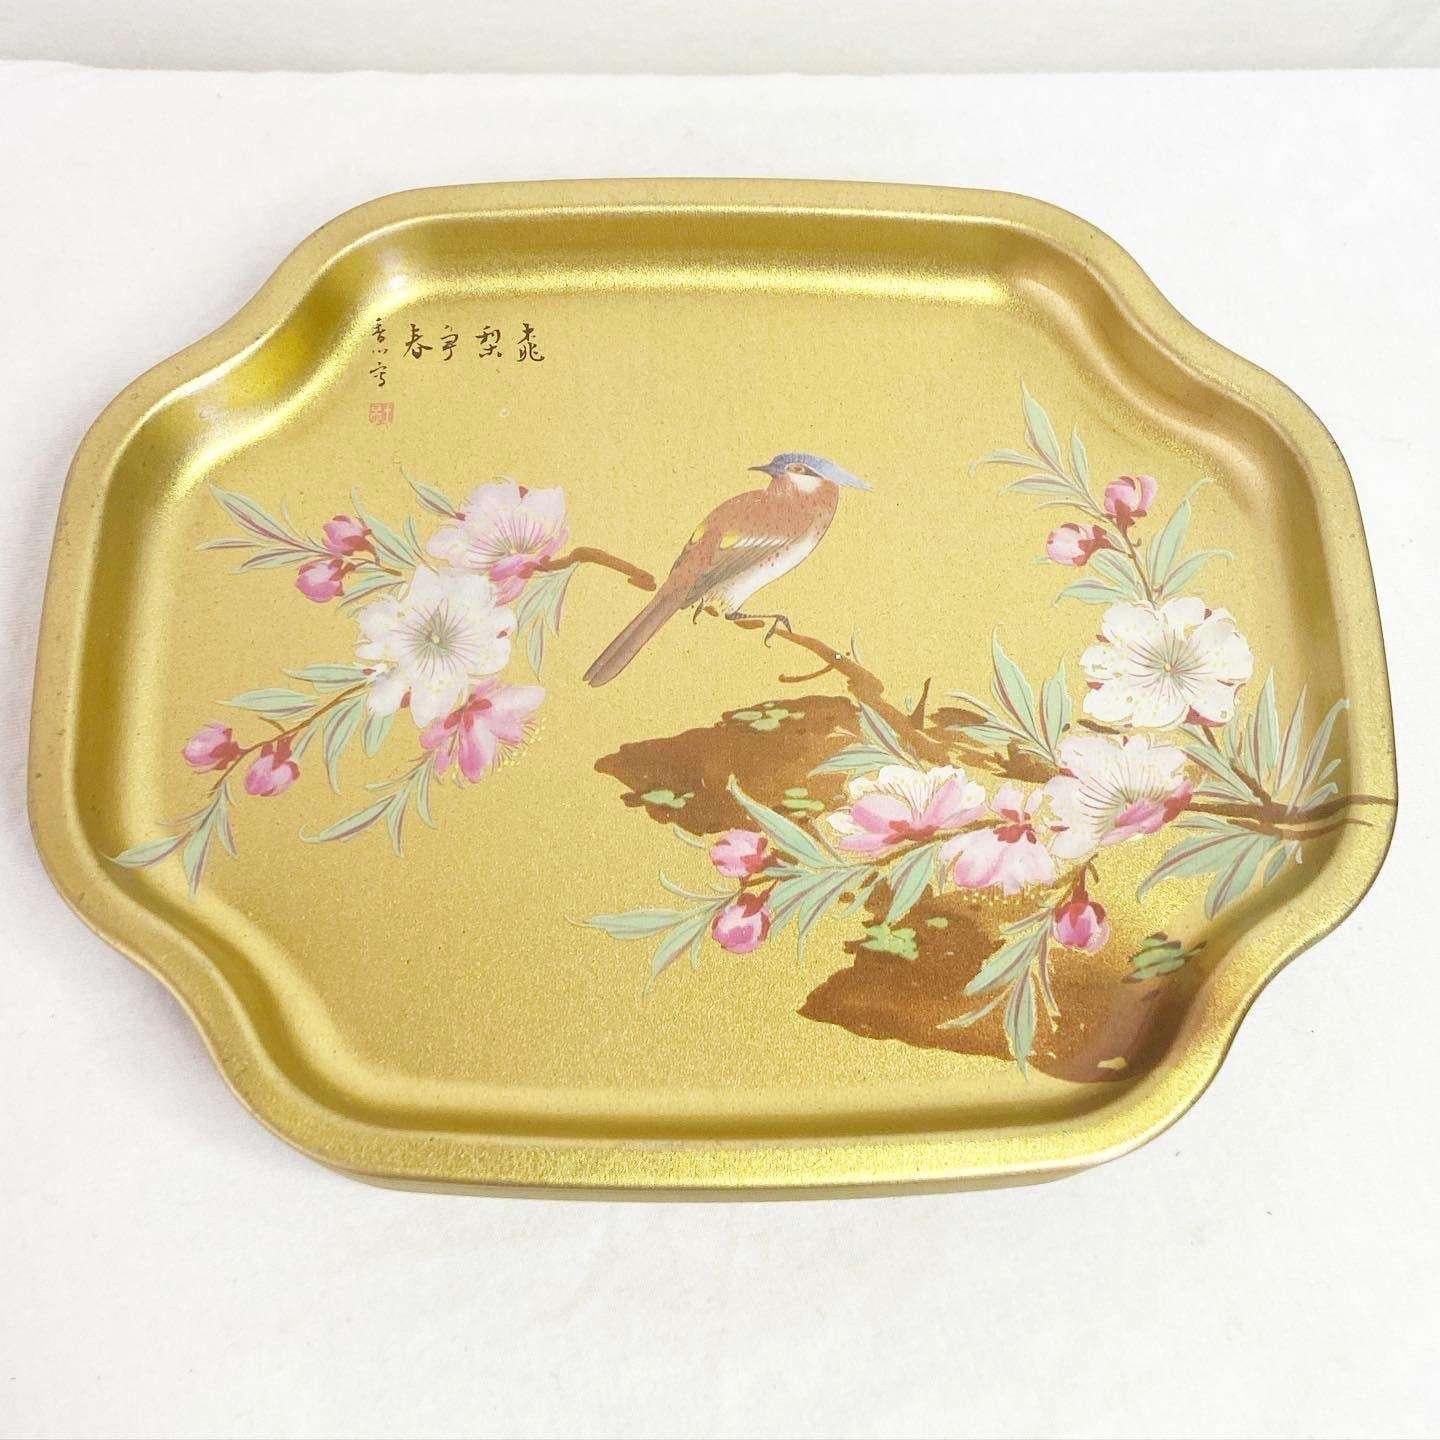 Amazing vintage Elite gold metal tray creates a layer of “art” and interest wherever it is placed. Small in scale but brimming with style, this tray delivers vibrant color in rich metallic gold, accented by beautiful greens, pinks. blue and white.